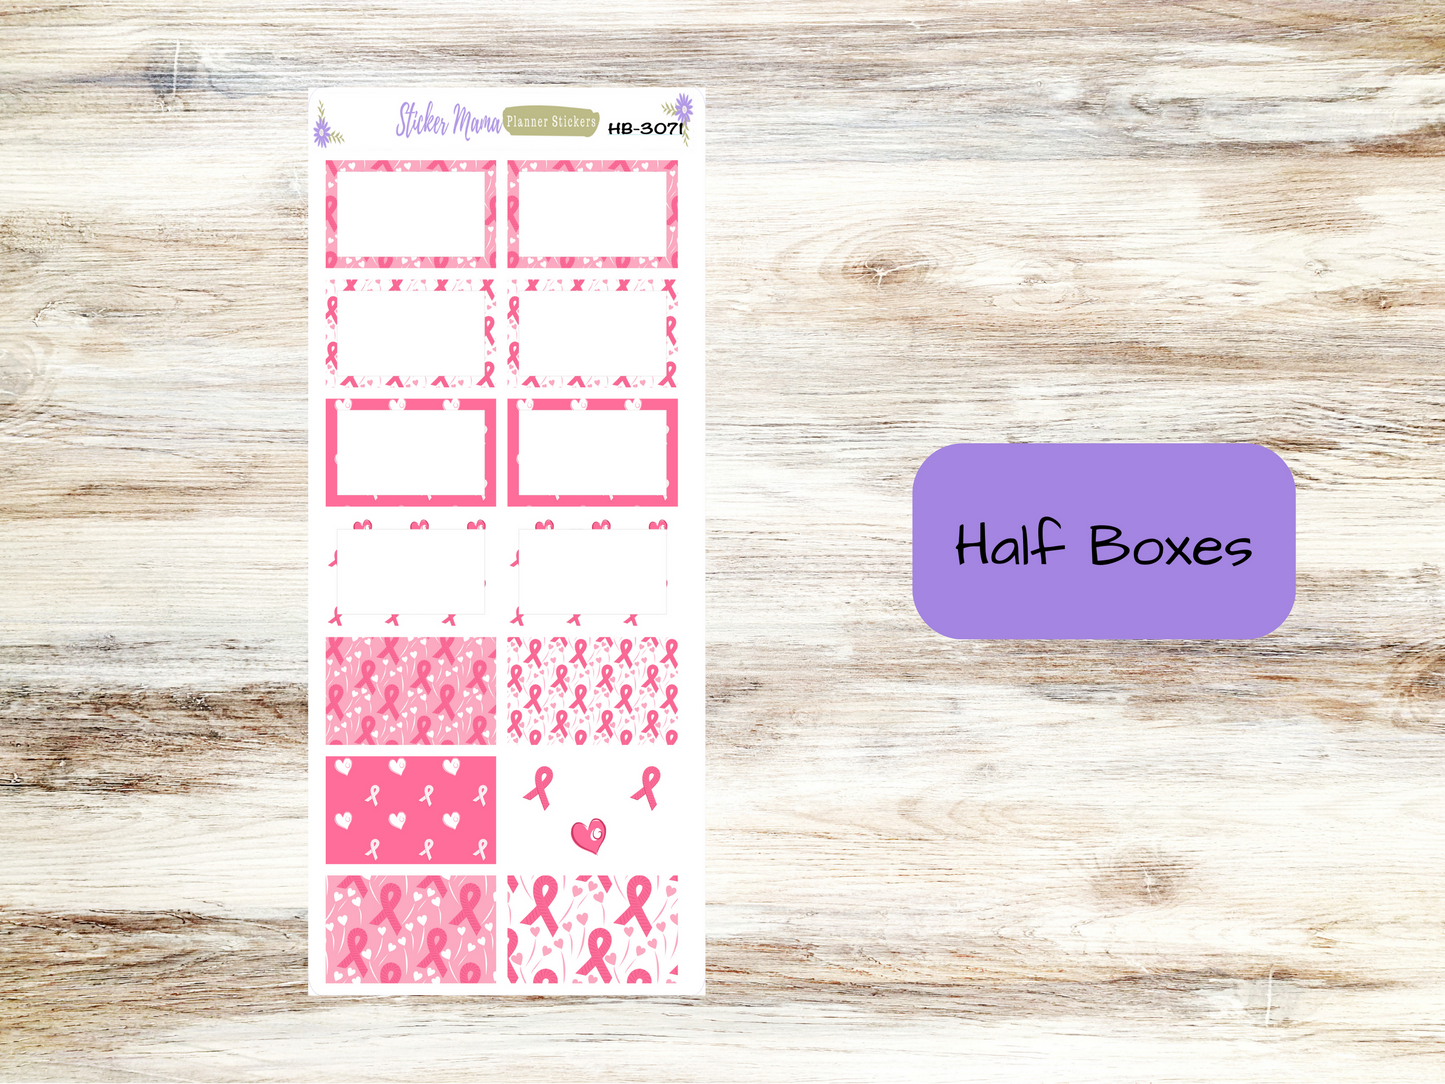 BL-3071 - HB-3071 October Breast Cancer Stickers - Basic Labels  - Half Boxes - Planner Stickers - Full Box for Planners